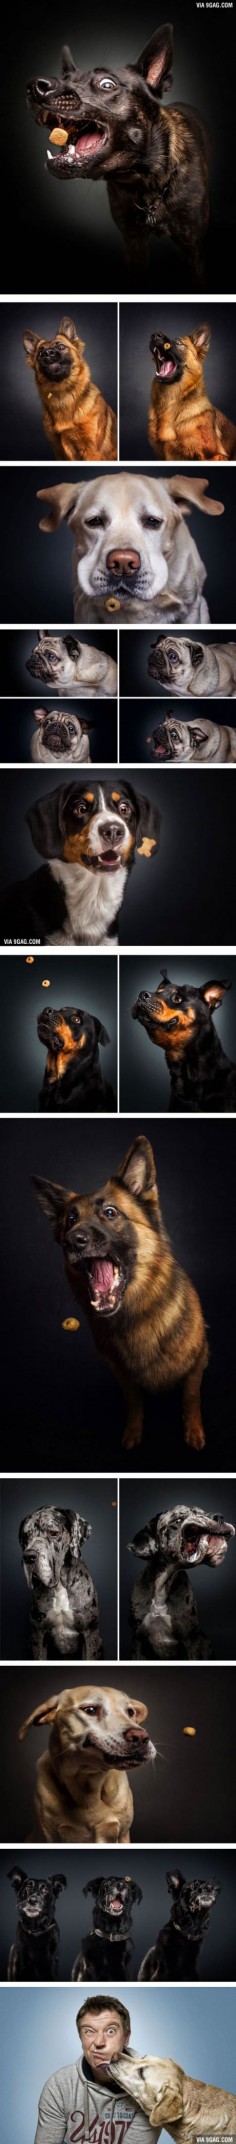 Photographer Captures Hungry Dogs’ Funny Faces When They Catch Treats (By Christian Vieler)